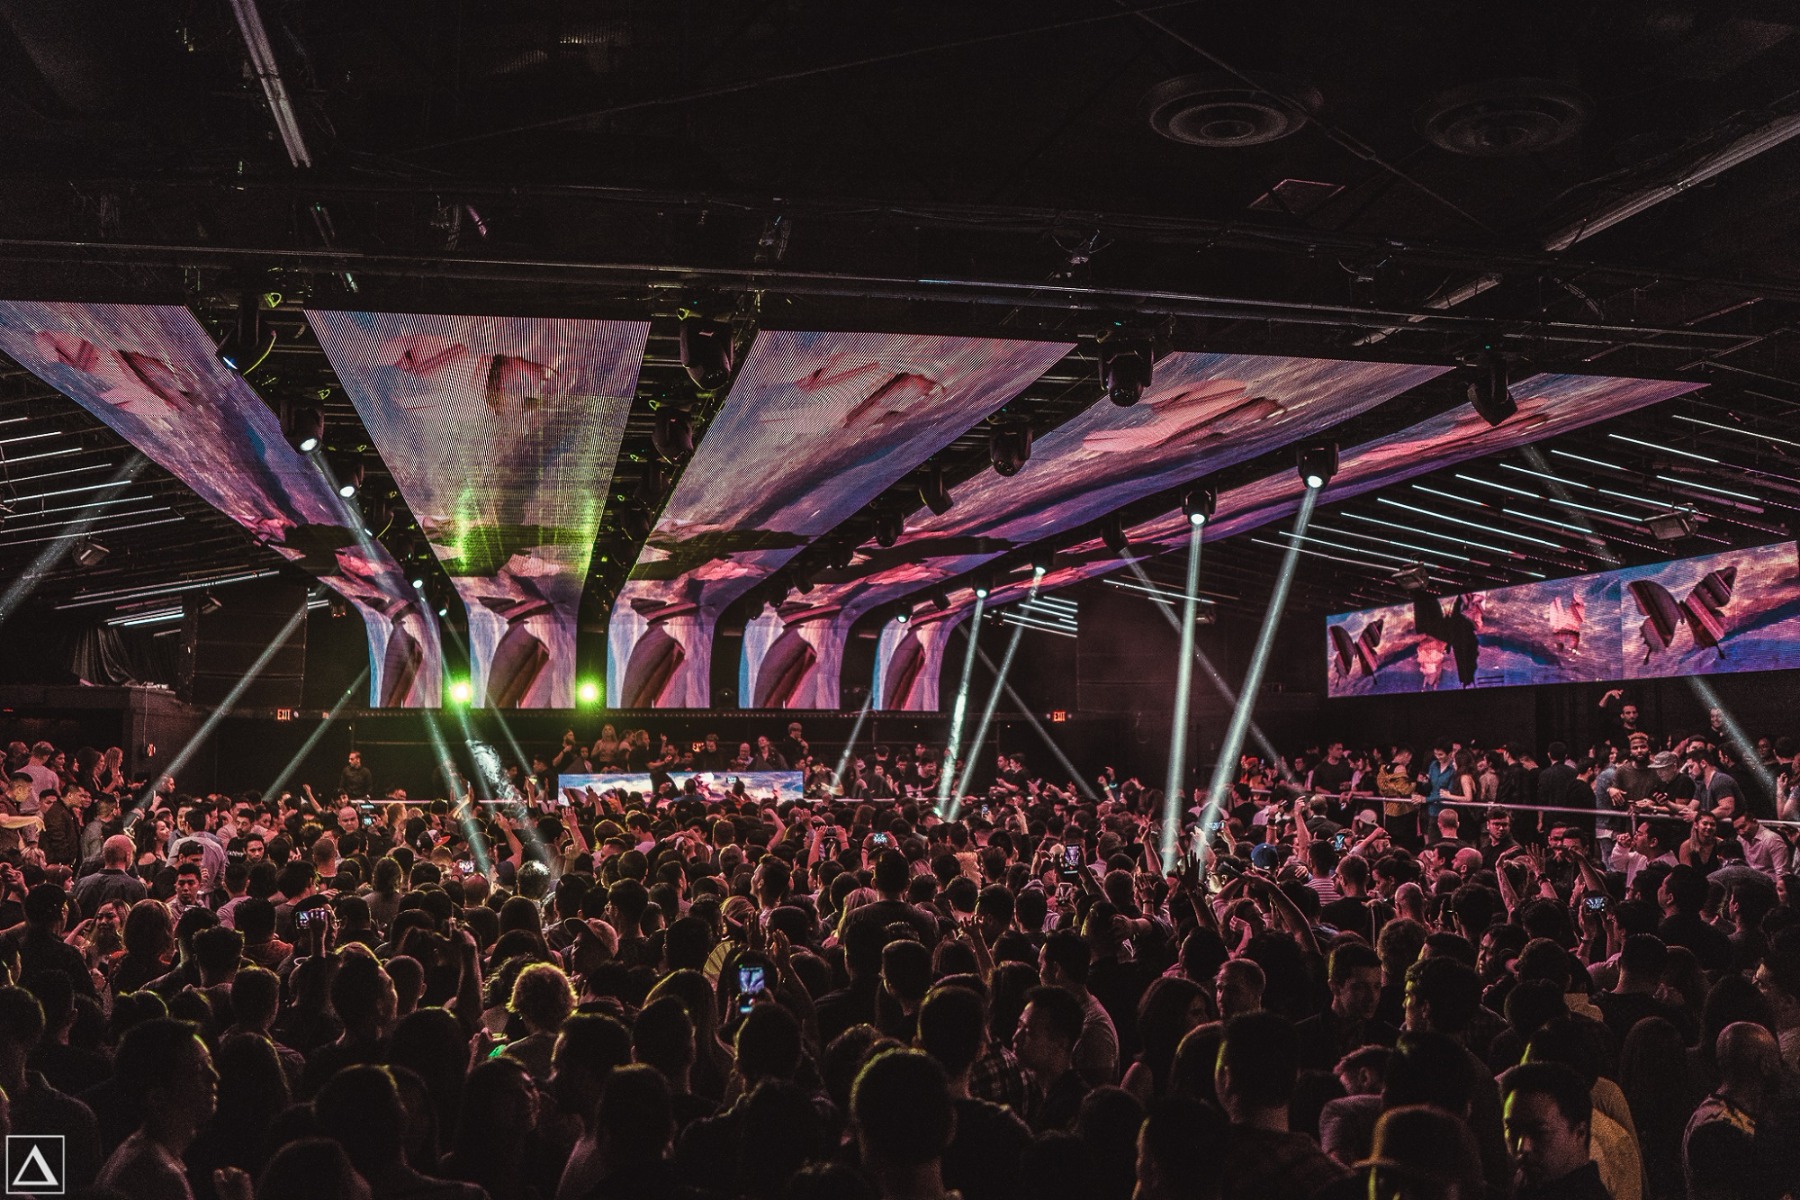 Elation Gets Immersive at Academy Nightclub in HollywoodGallery Image academy club 1 